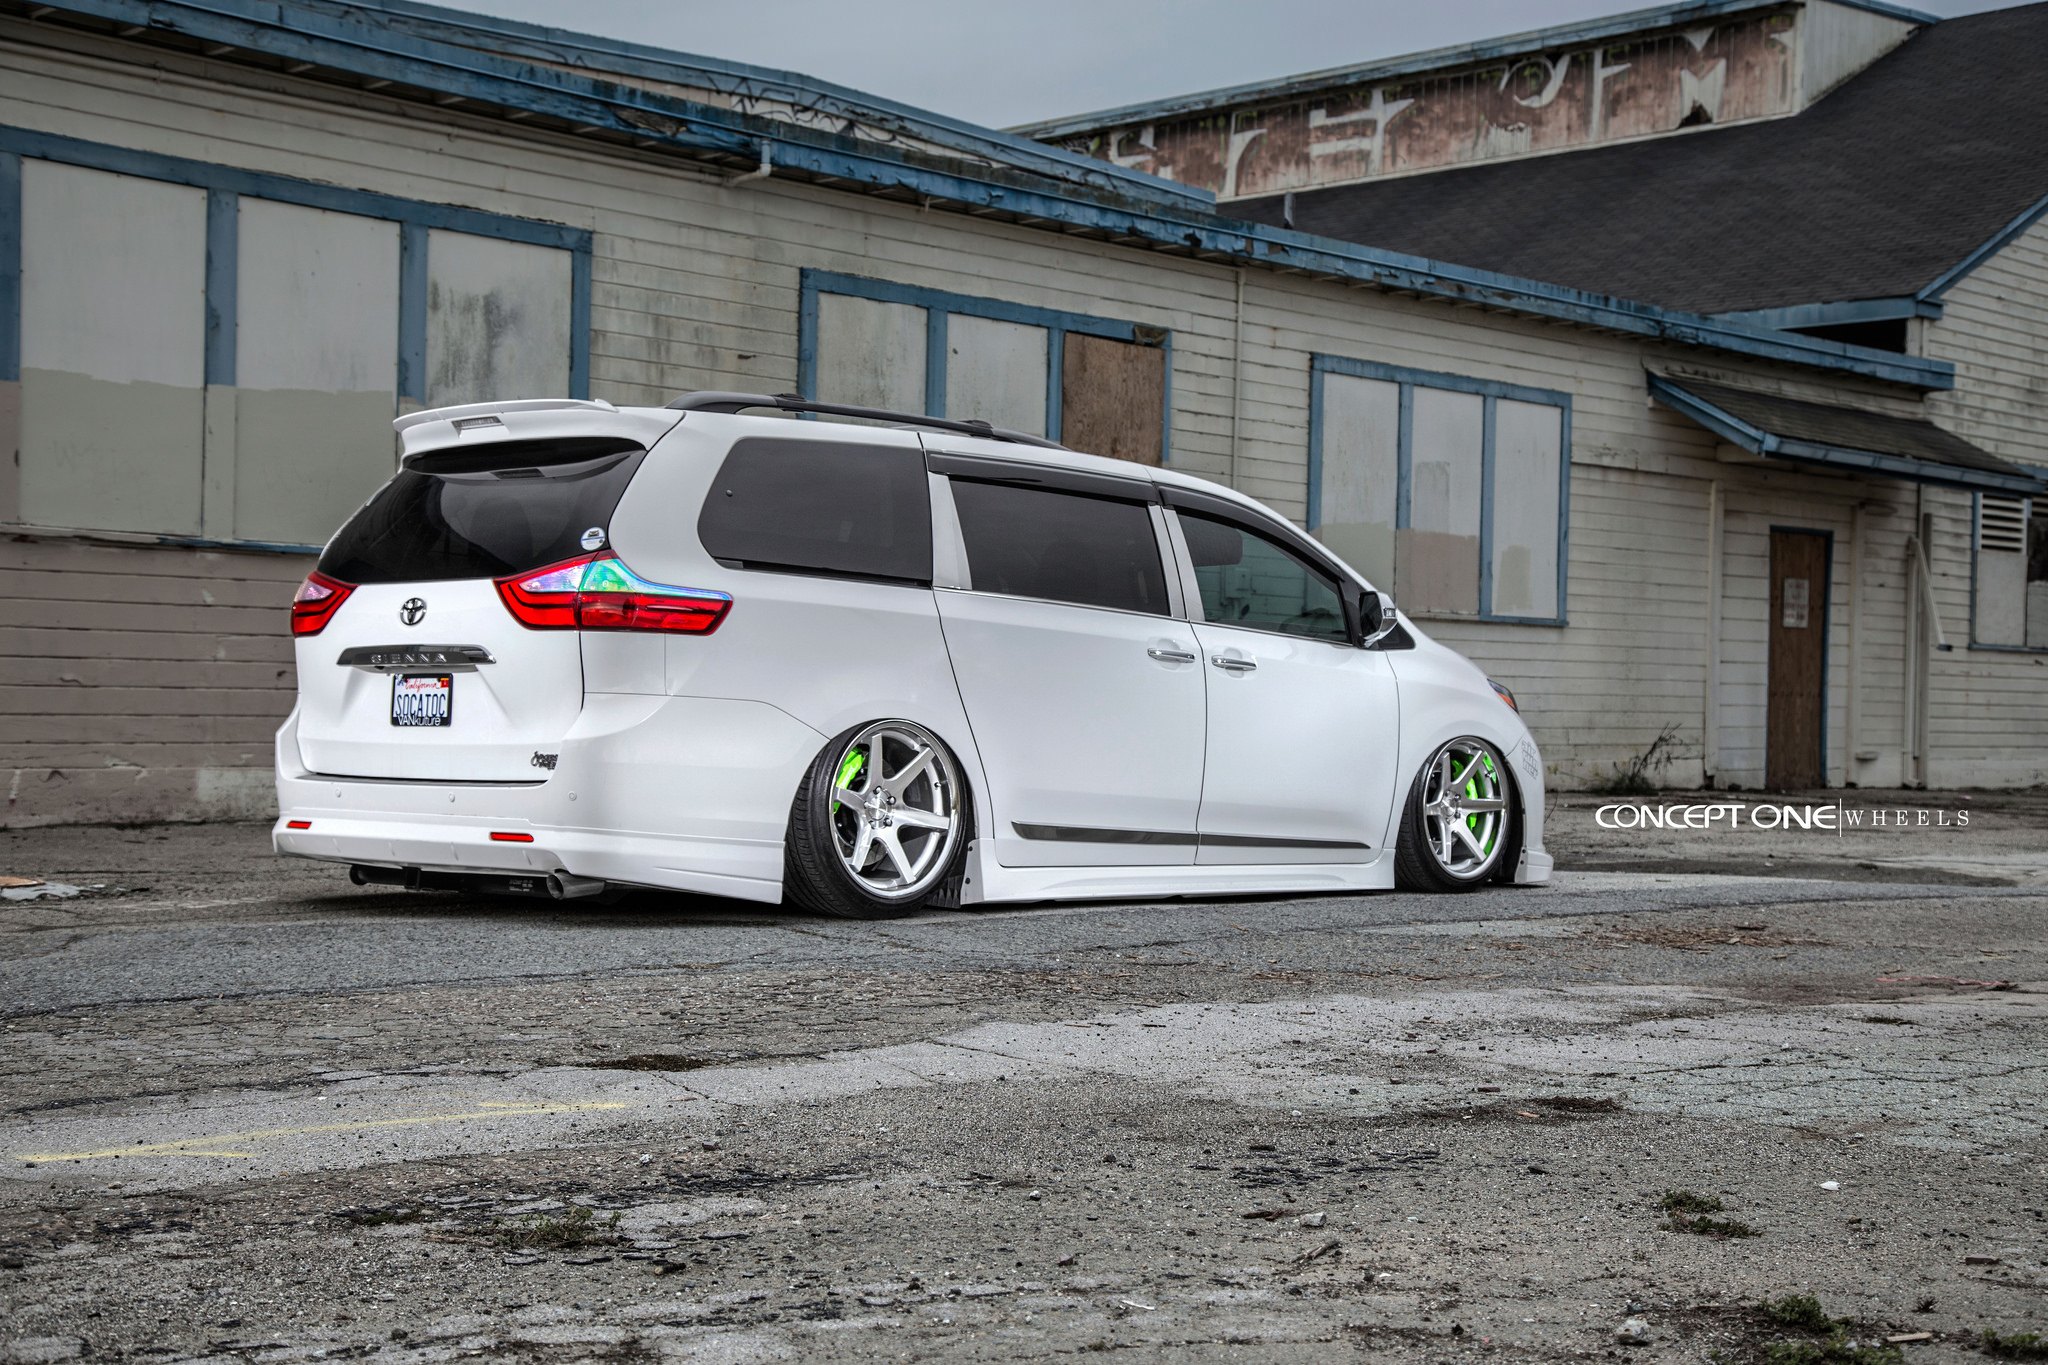 Roofline Spoiler with Light on White Toyota Sienna - Photo by Concept One